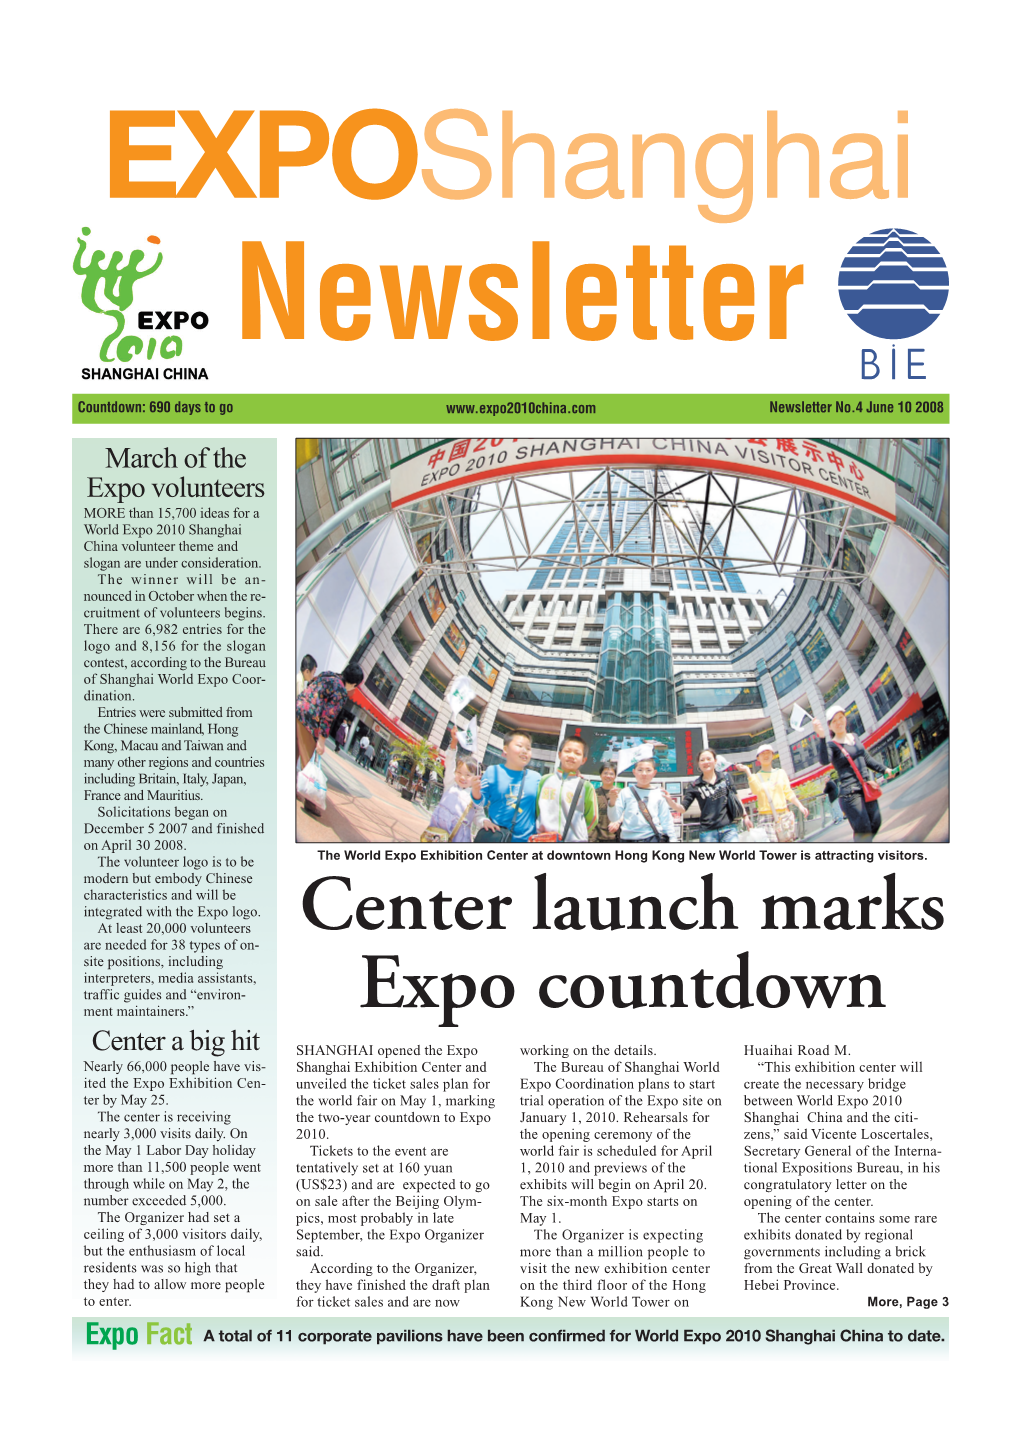 Center Launch Marks Expo Countdown